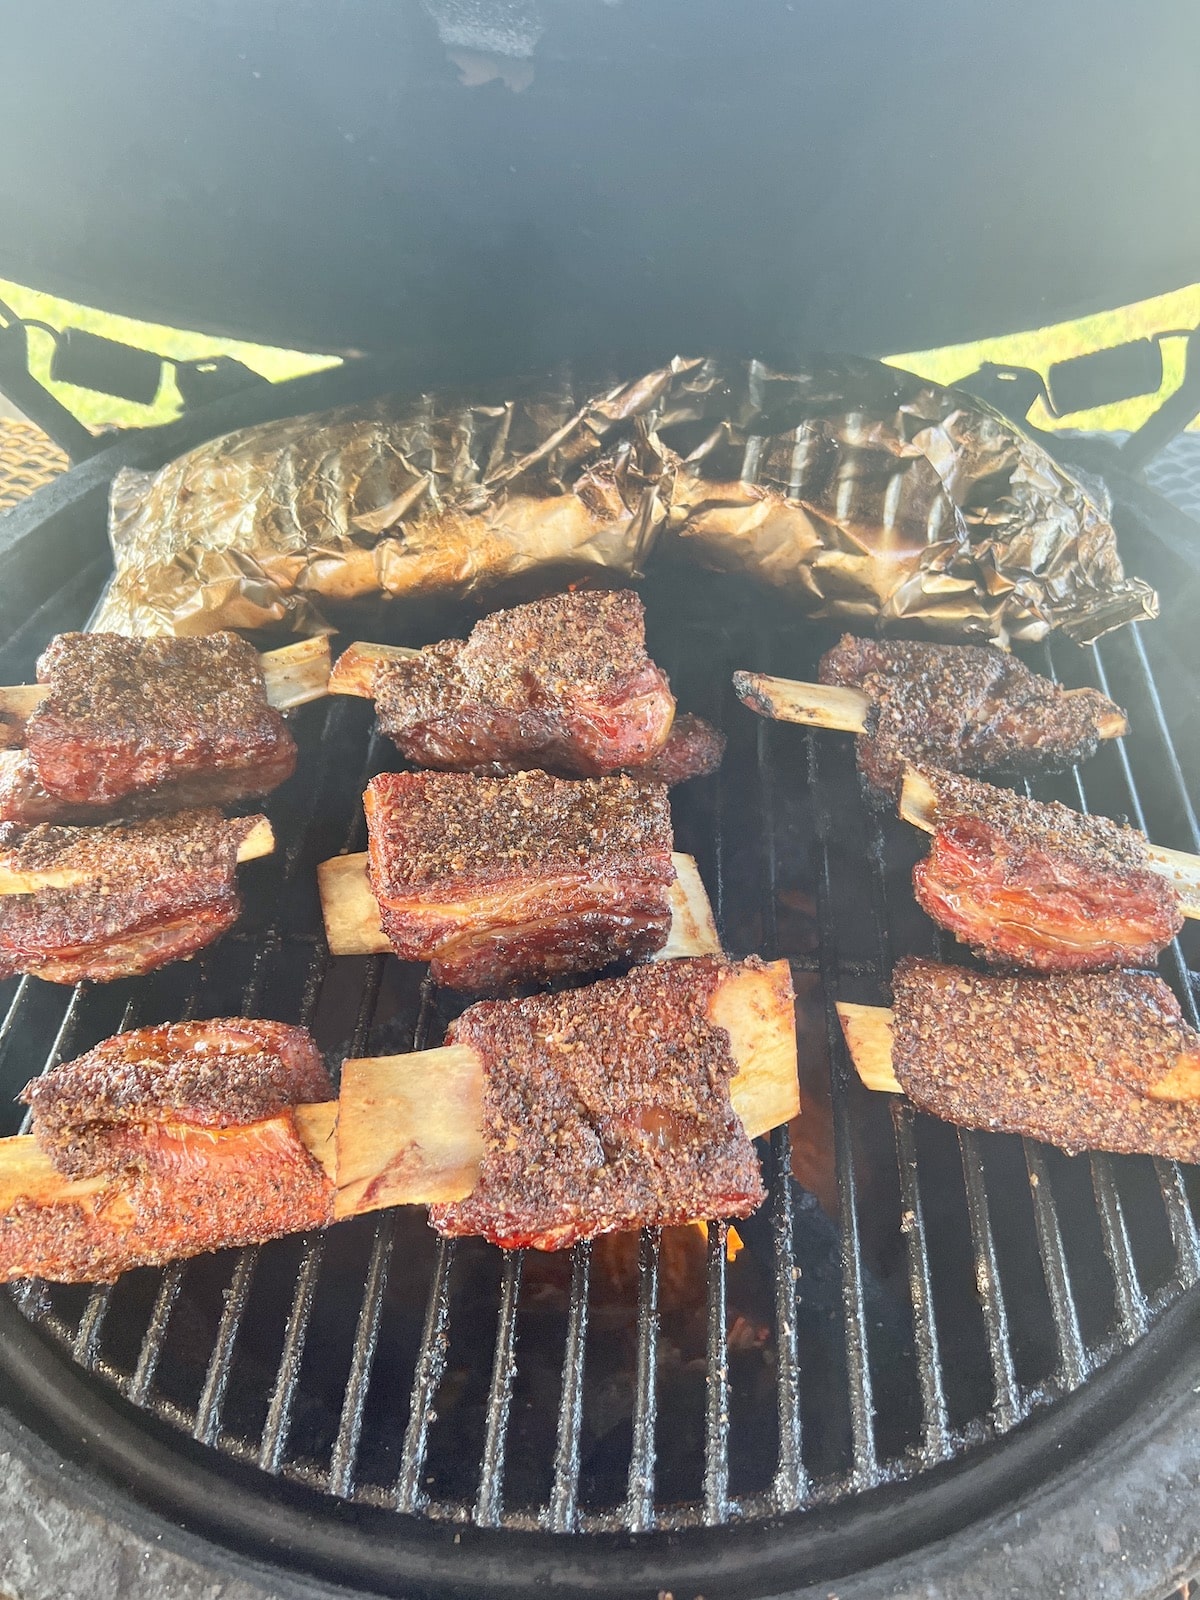 Beef ribs on a grill with a foil packet of potatoes.